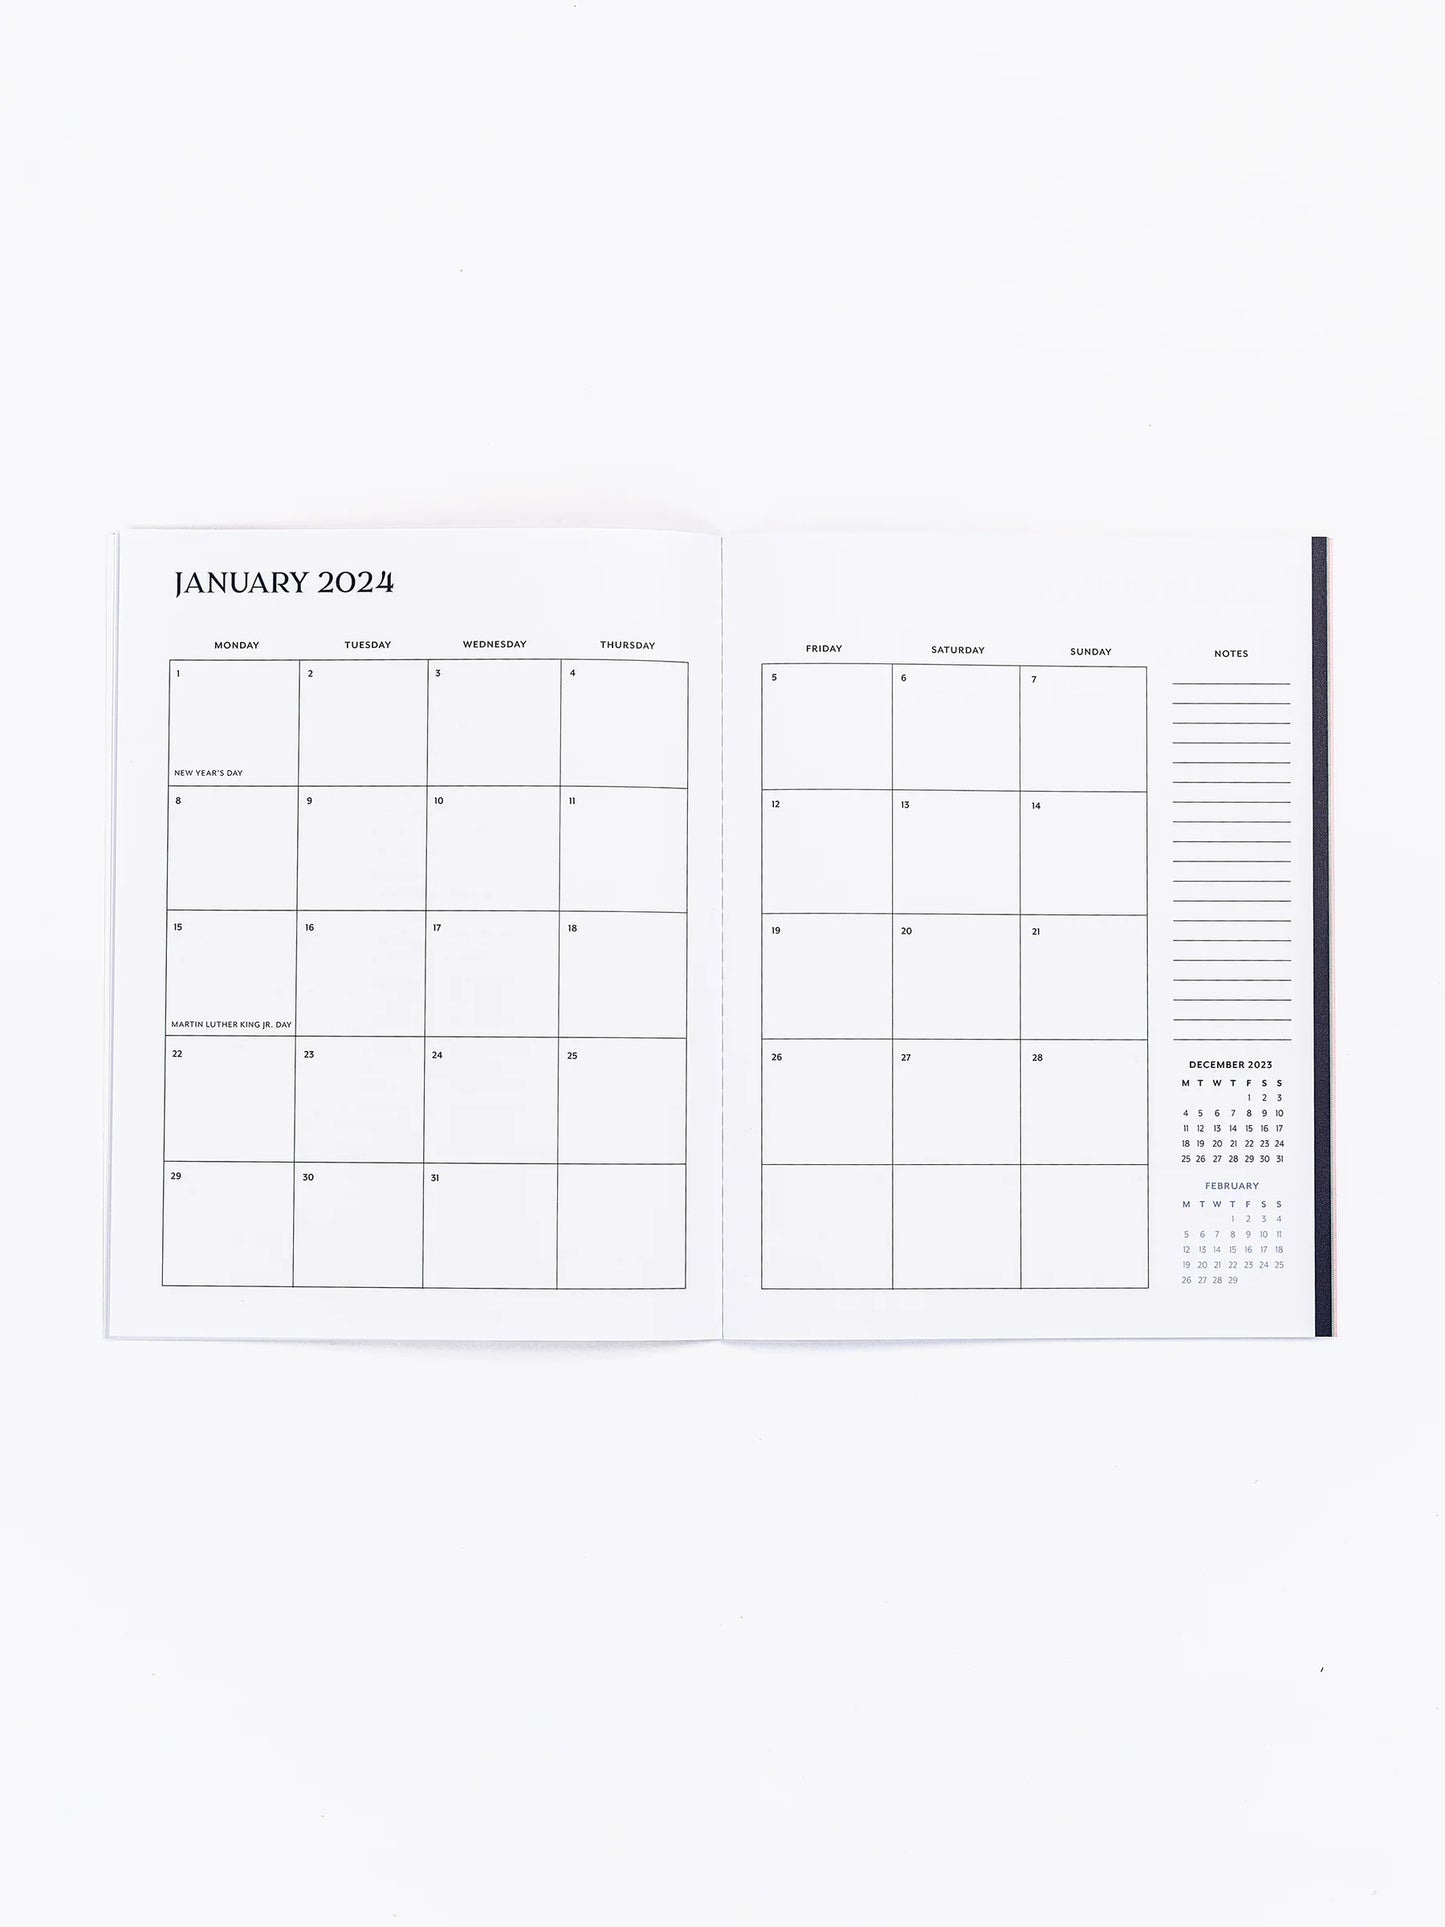 So Darling 2024 Medium Monthly Planner | Bubble Over Blue